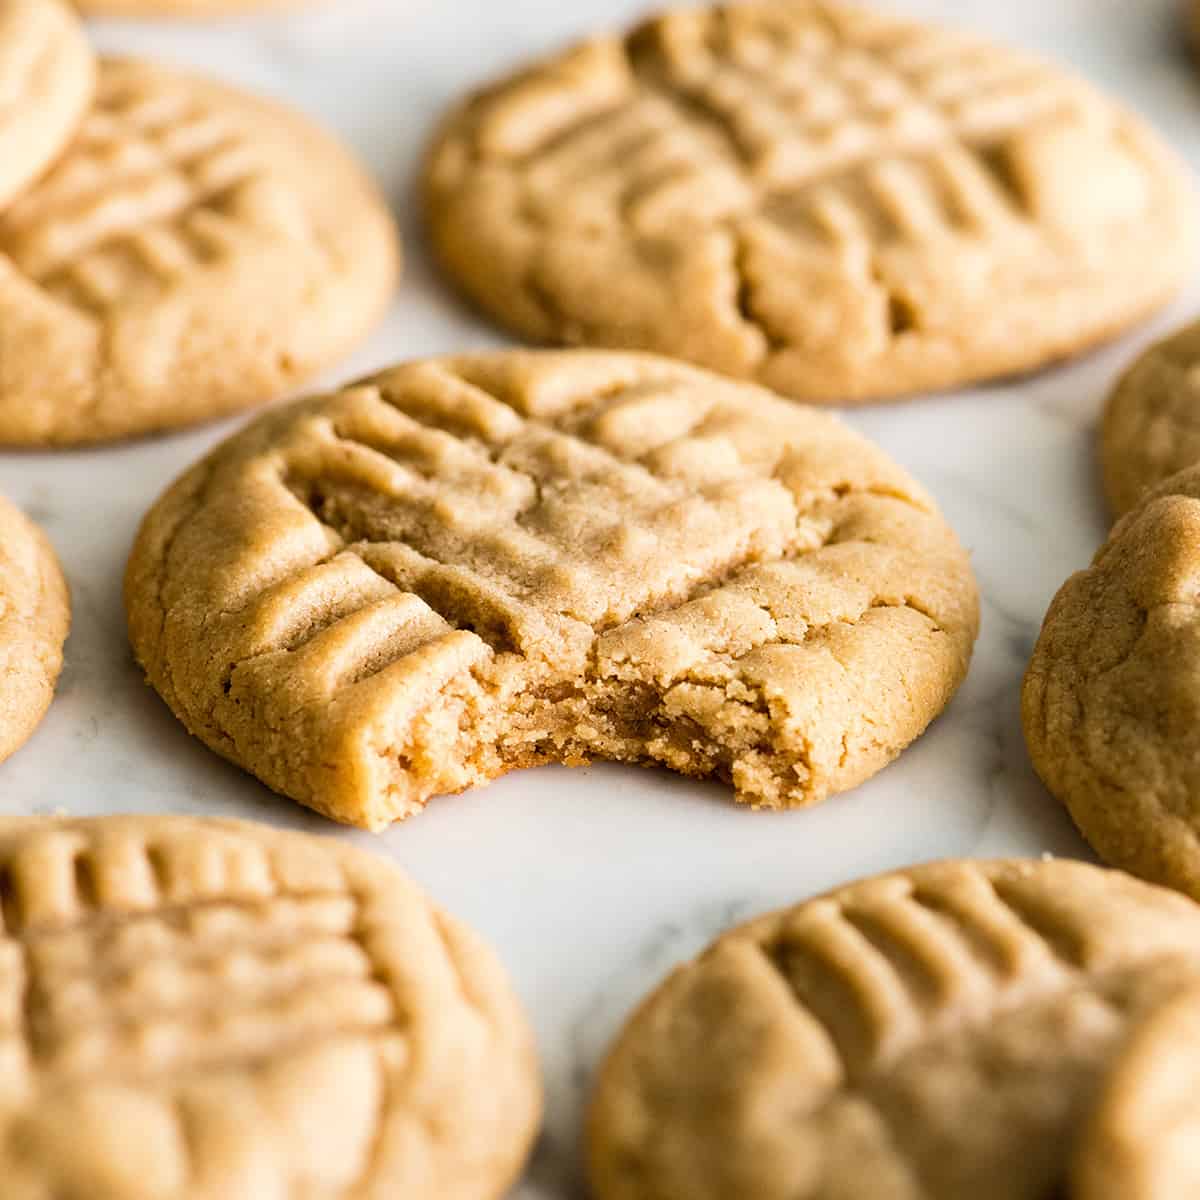 front view of a peanut butter cookie with a bite taken out of it